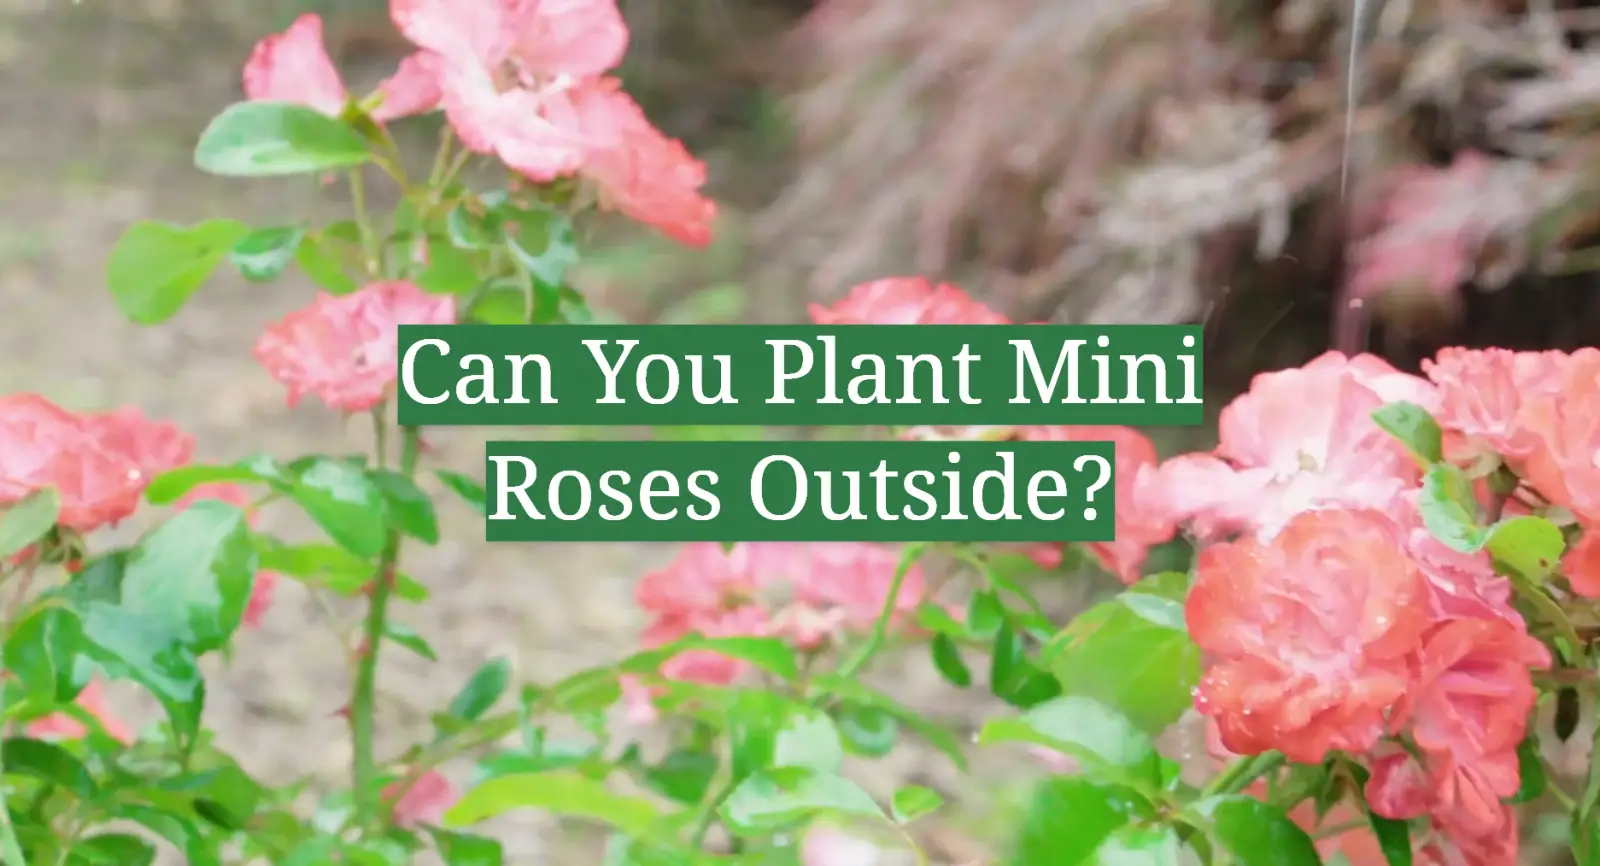 Can You Plant Mini Roses Outside?